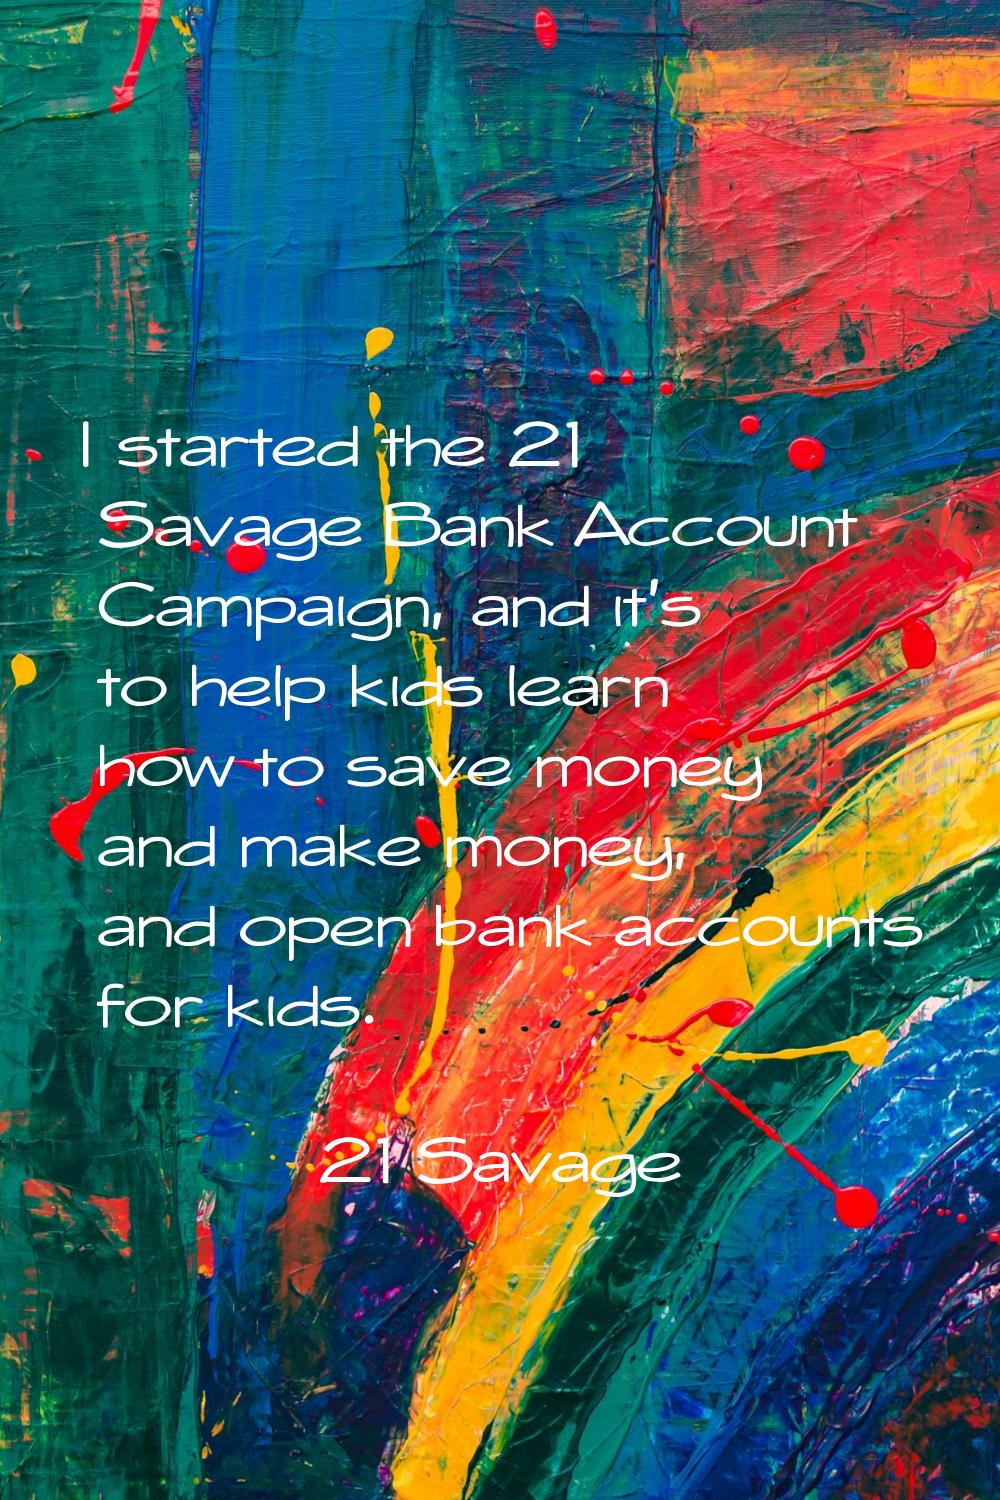 I started the 21 Savage Bank Account Campaign, and it's to help kids learn how to save money and ma